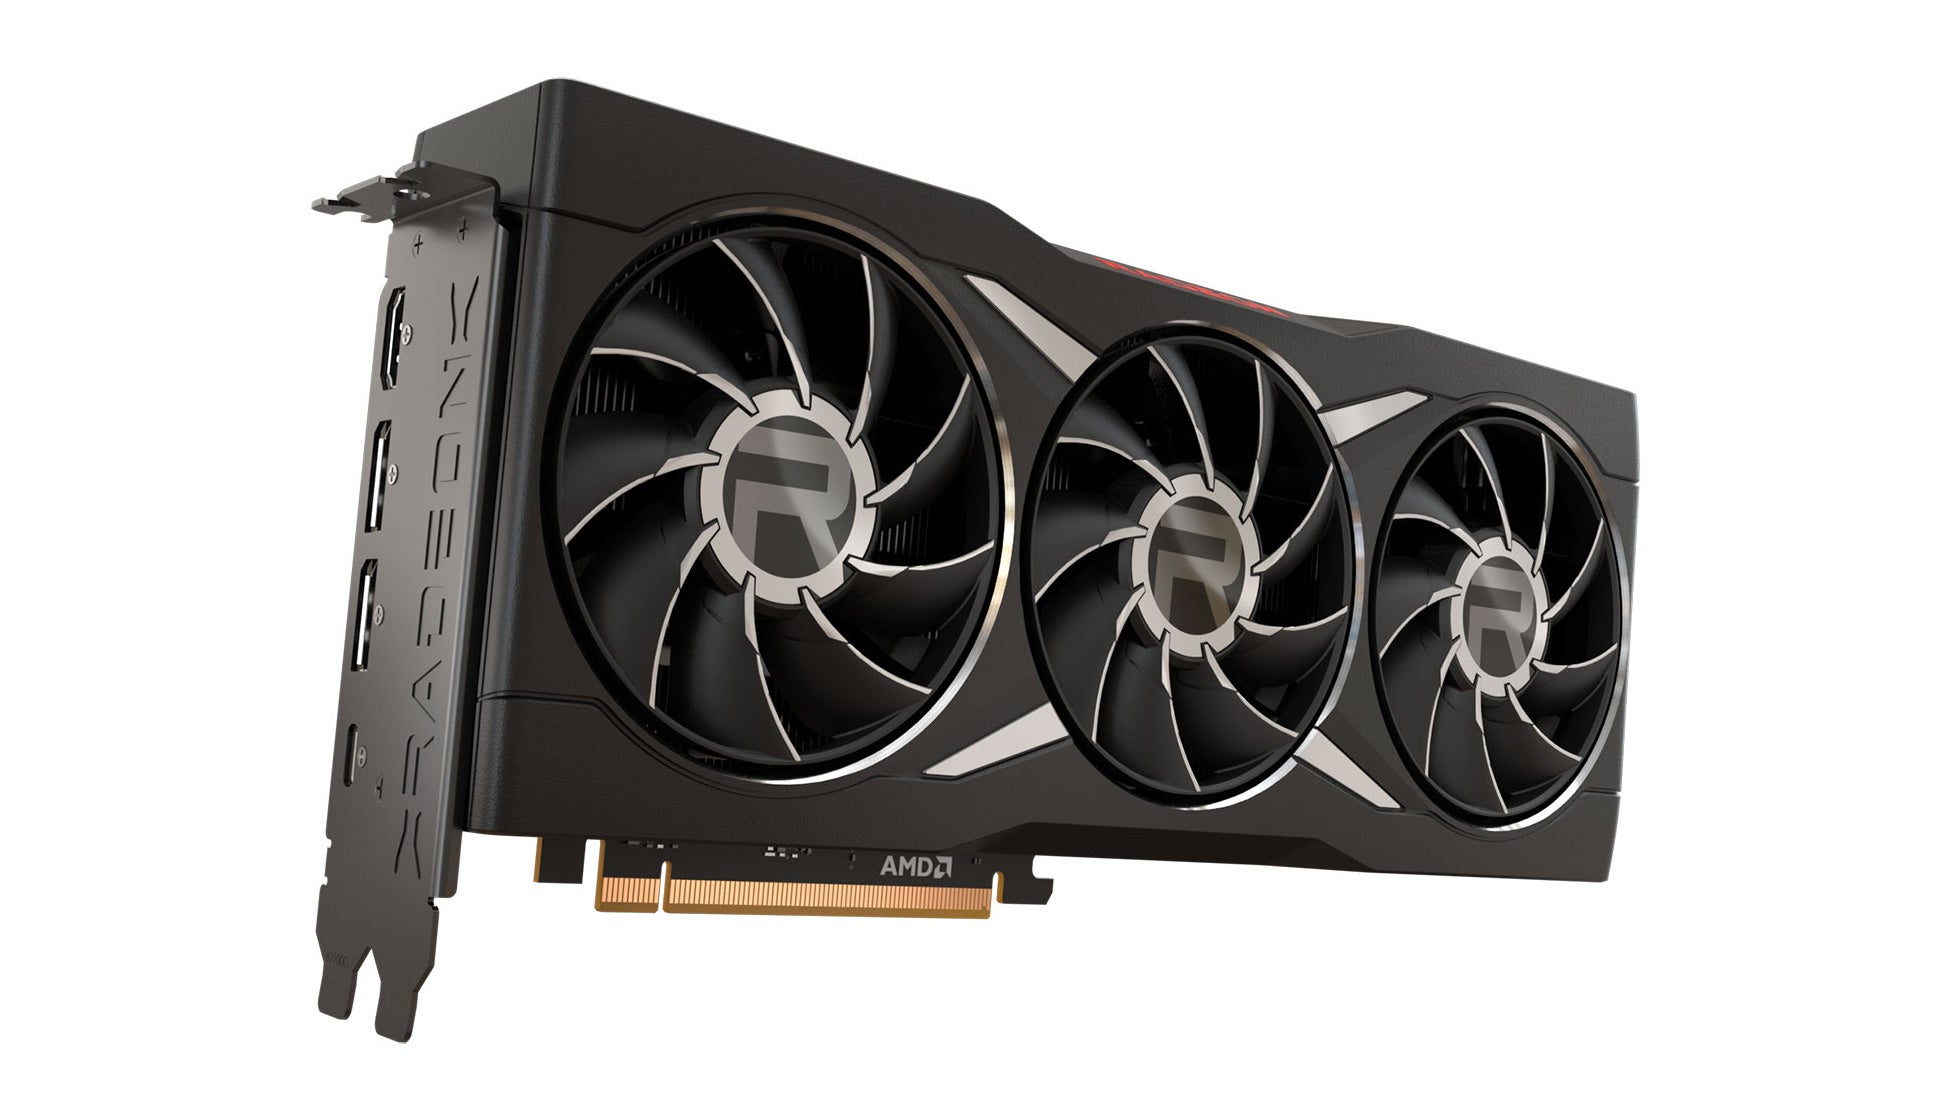 AMD's flagship RDNA 2 graphics card, the RX 6950 XT, is down to £700 (RRP £1100)